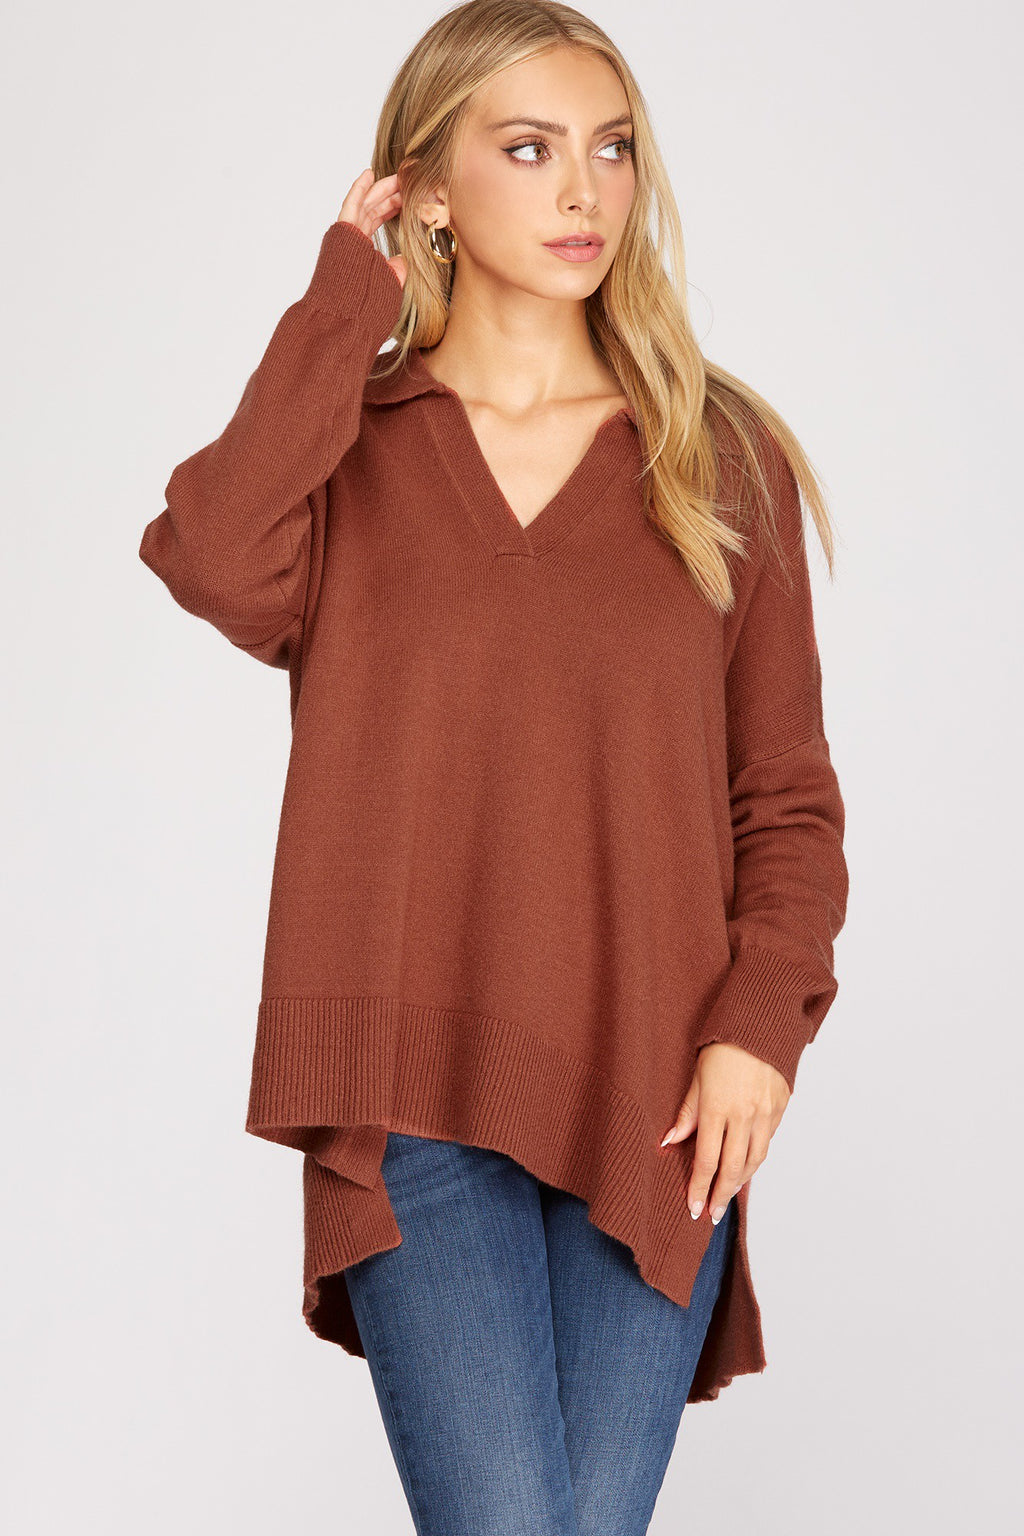 Charalyn Sweater